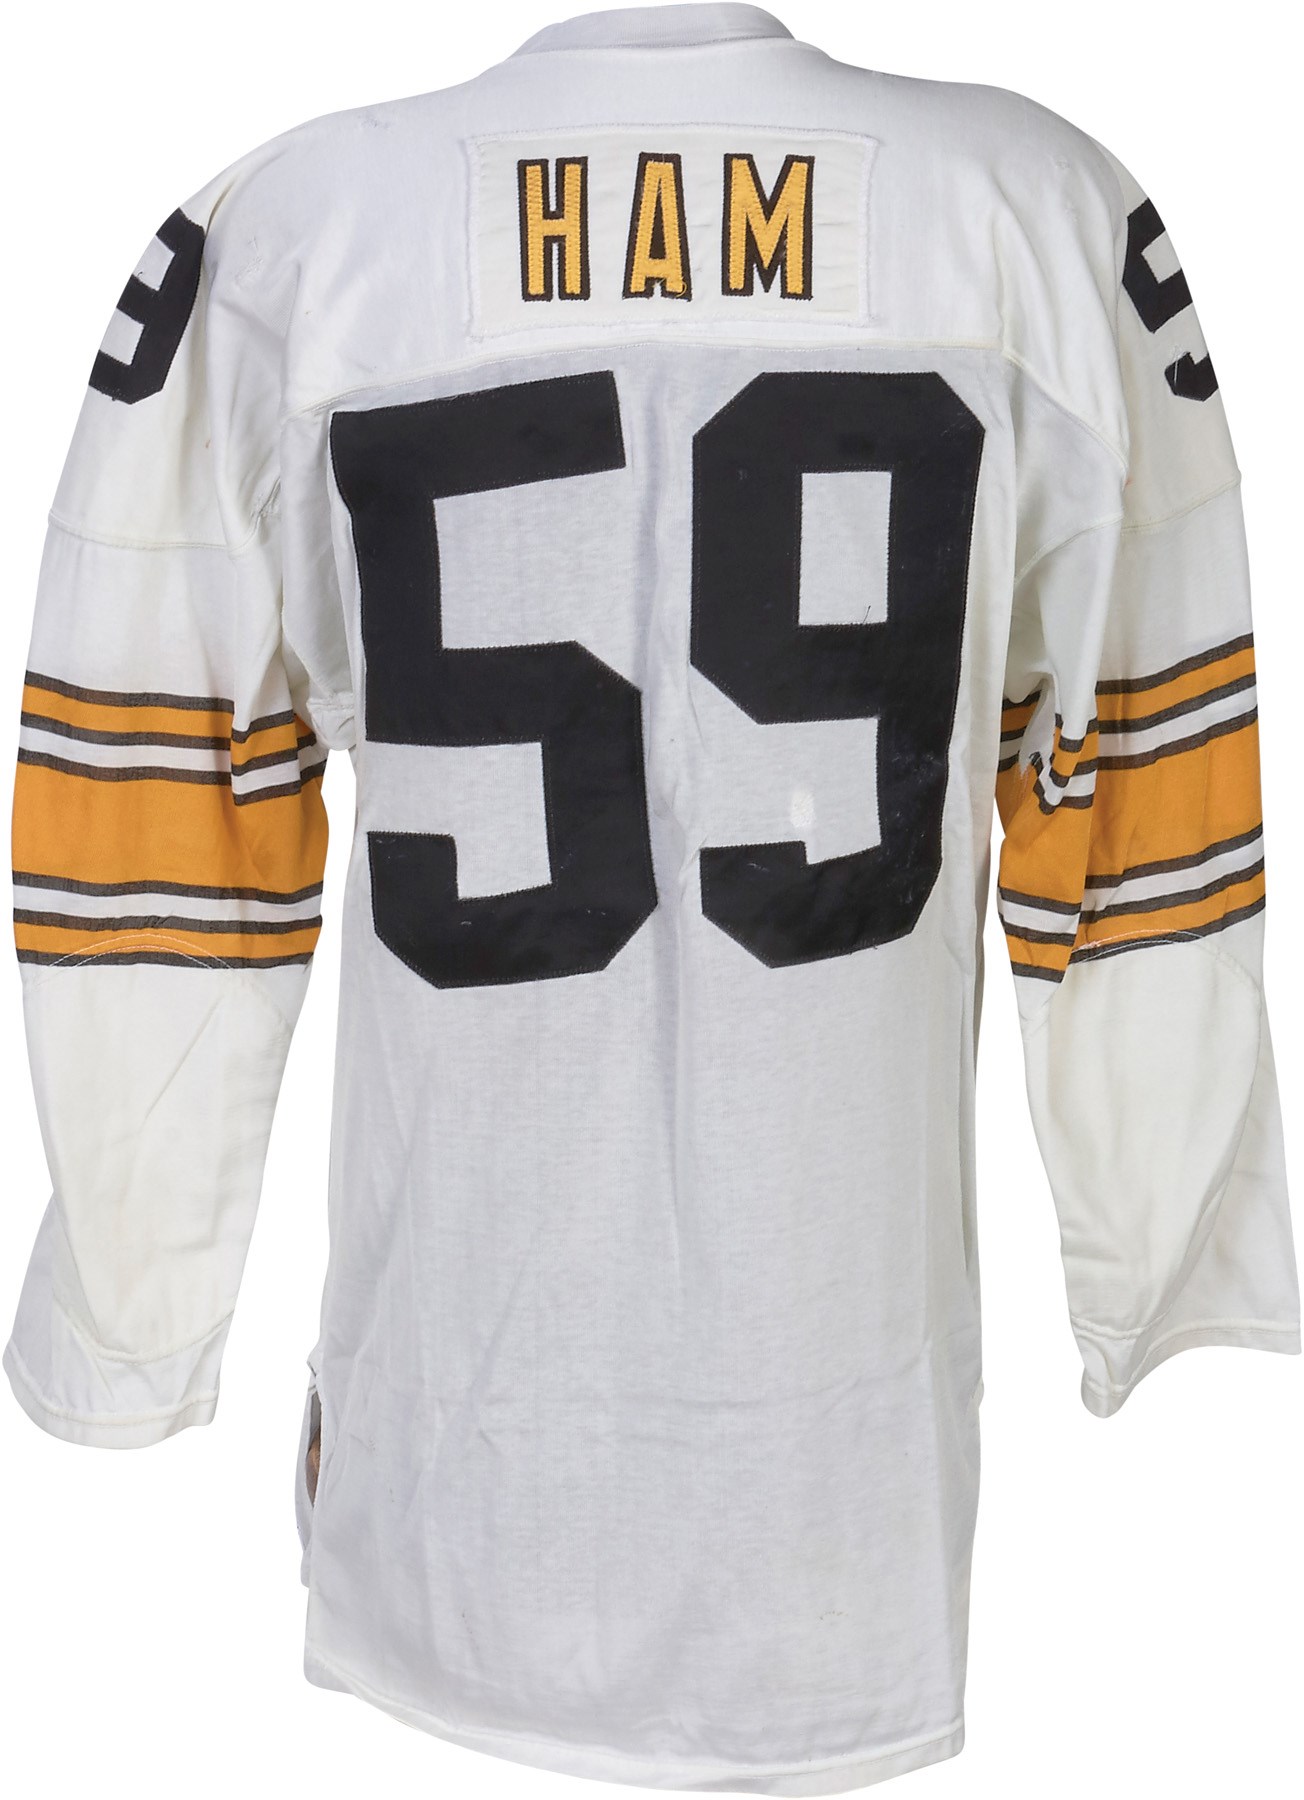 - 1982 Jack Ham Pittsburgh Steelers Game Worn Jersey (Photo-Matched)